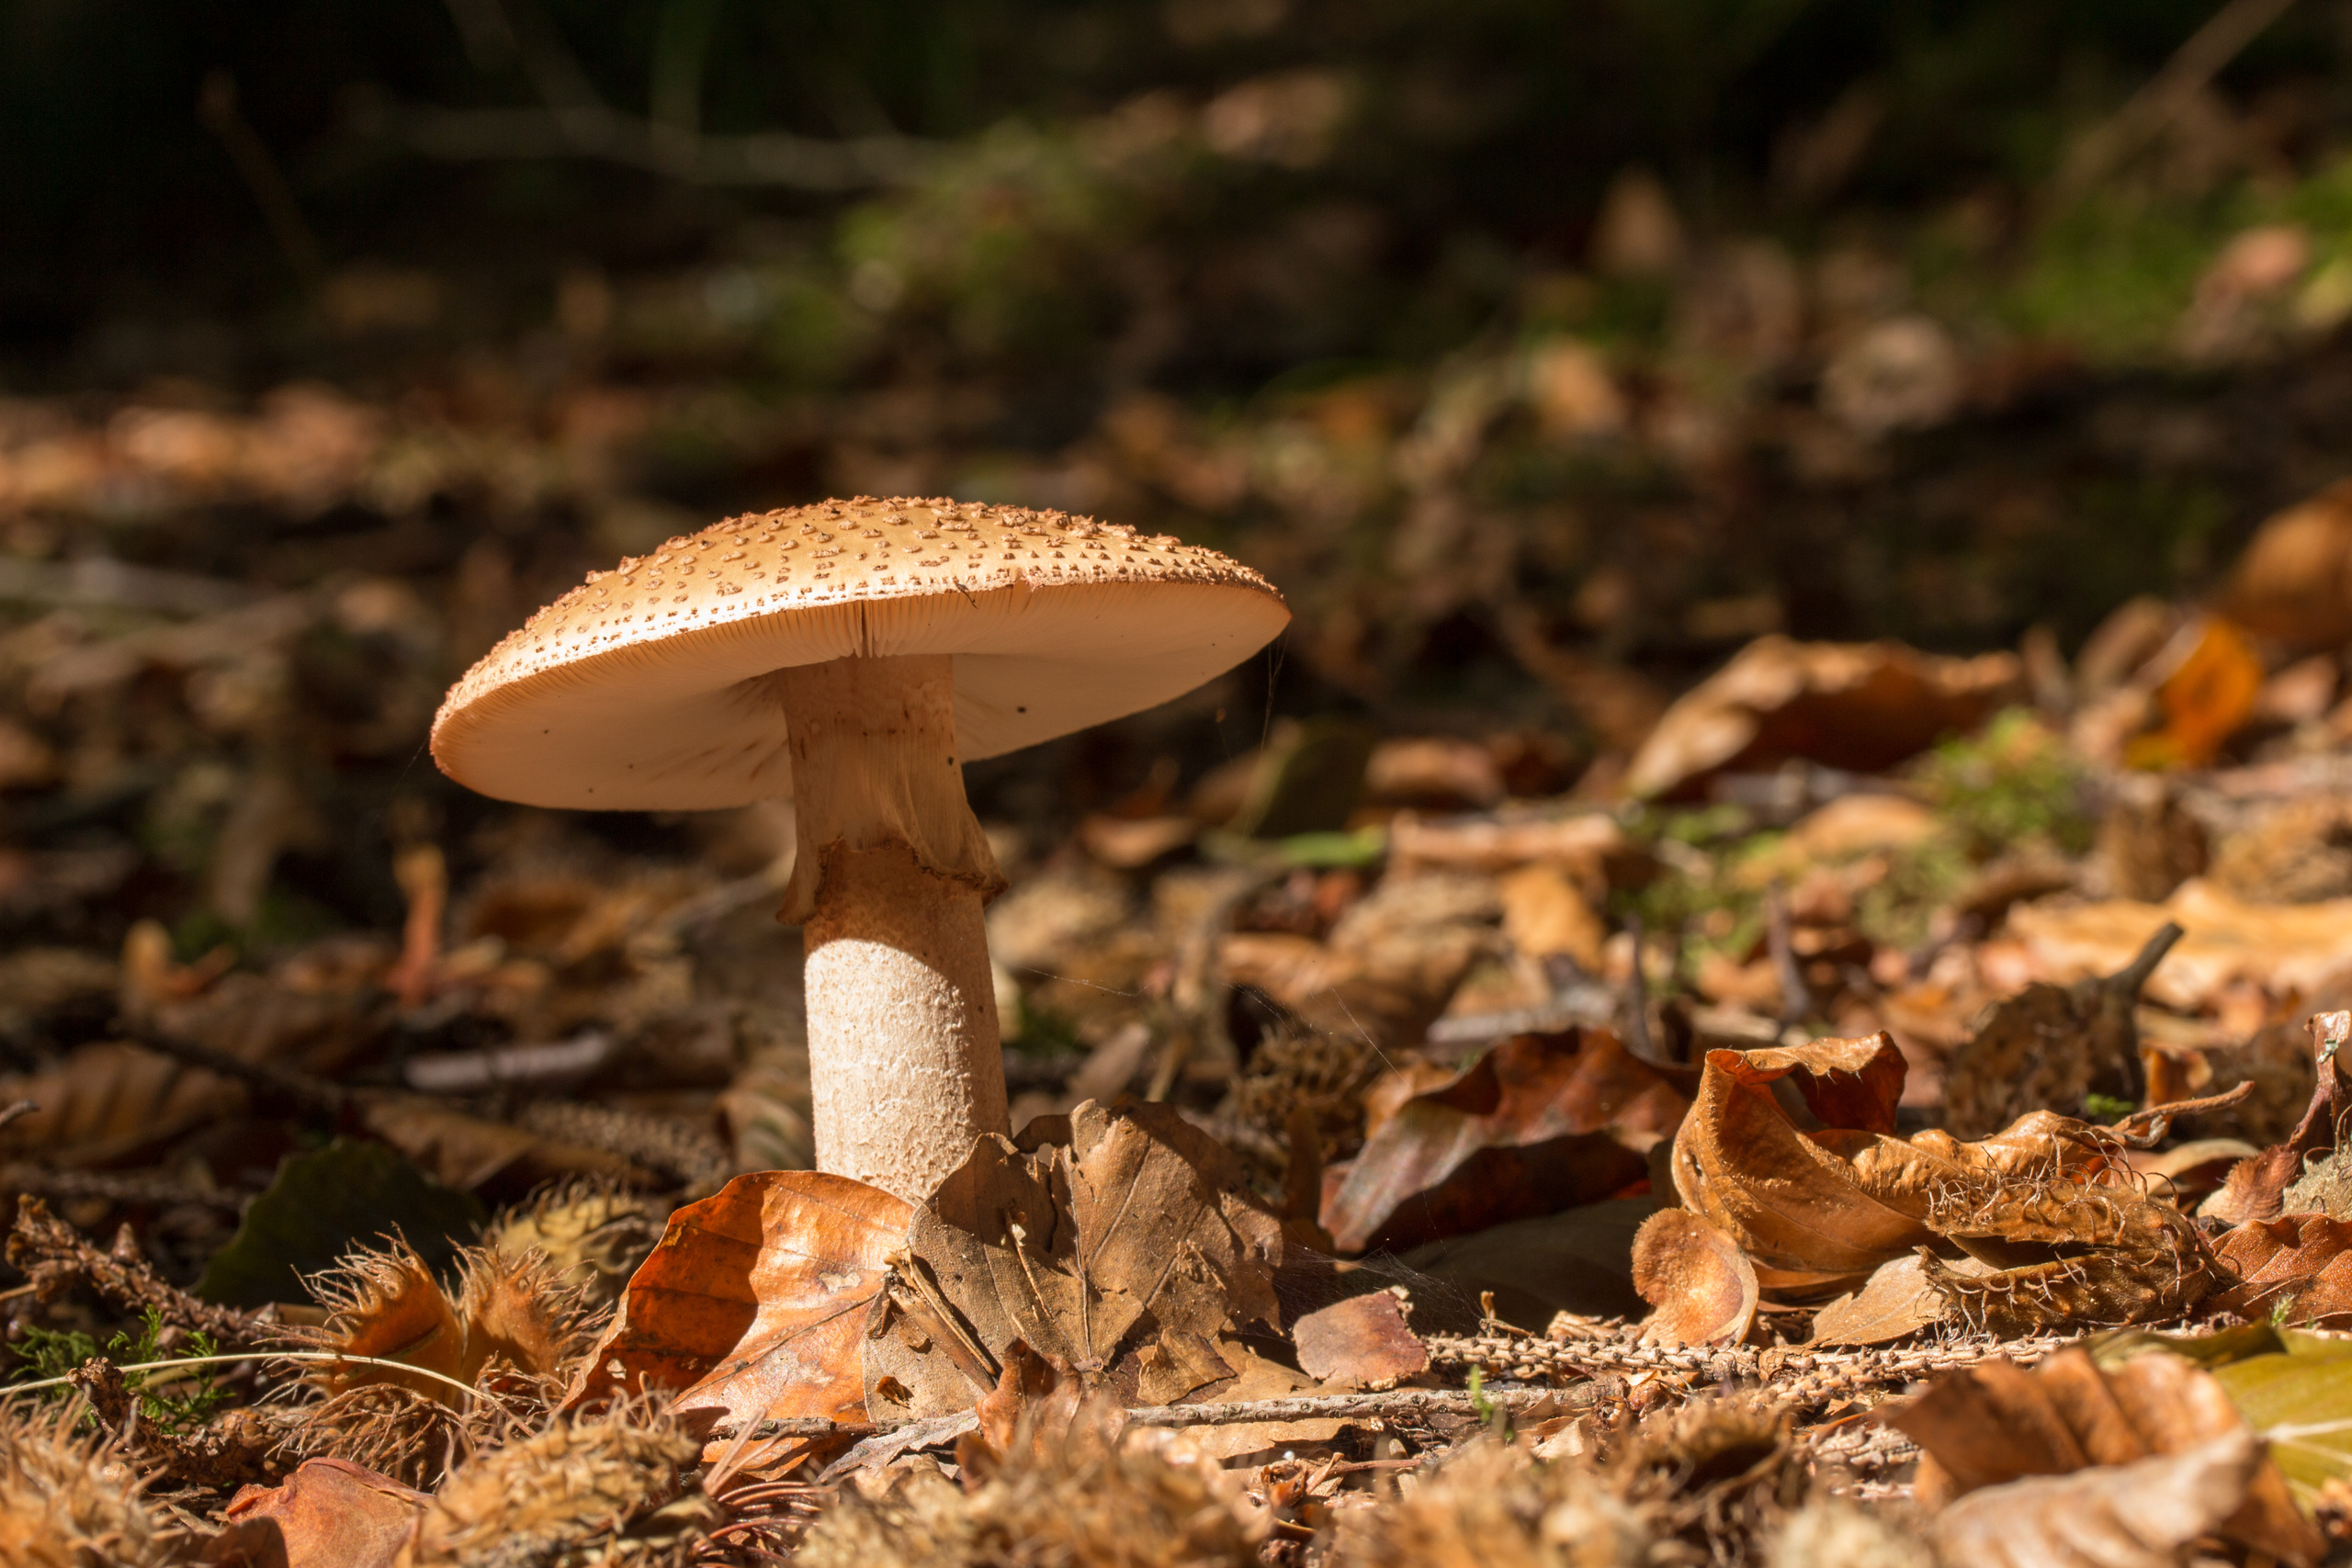 2560x1707 Wallpaper : mushroom, forest, nature, moss, fall, fungus, leaves dhremdt 1469089 HD Wallpapers